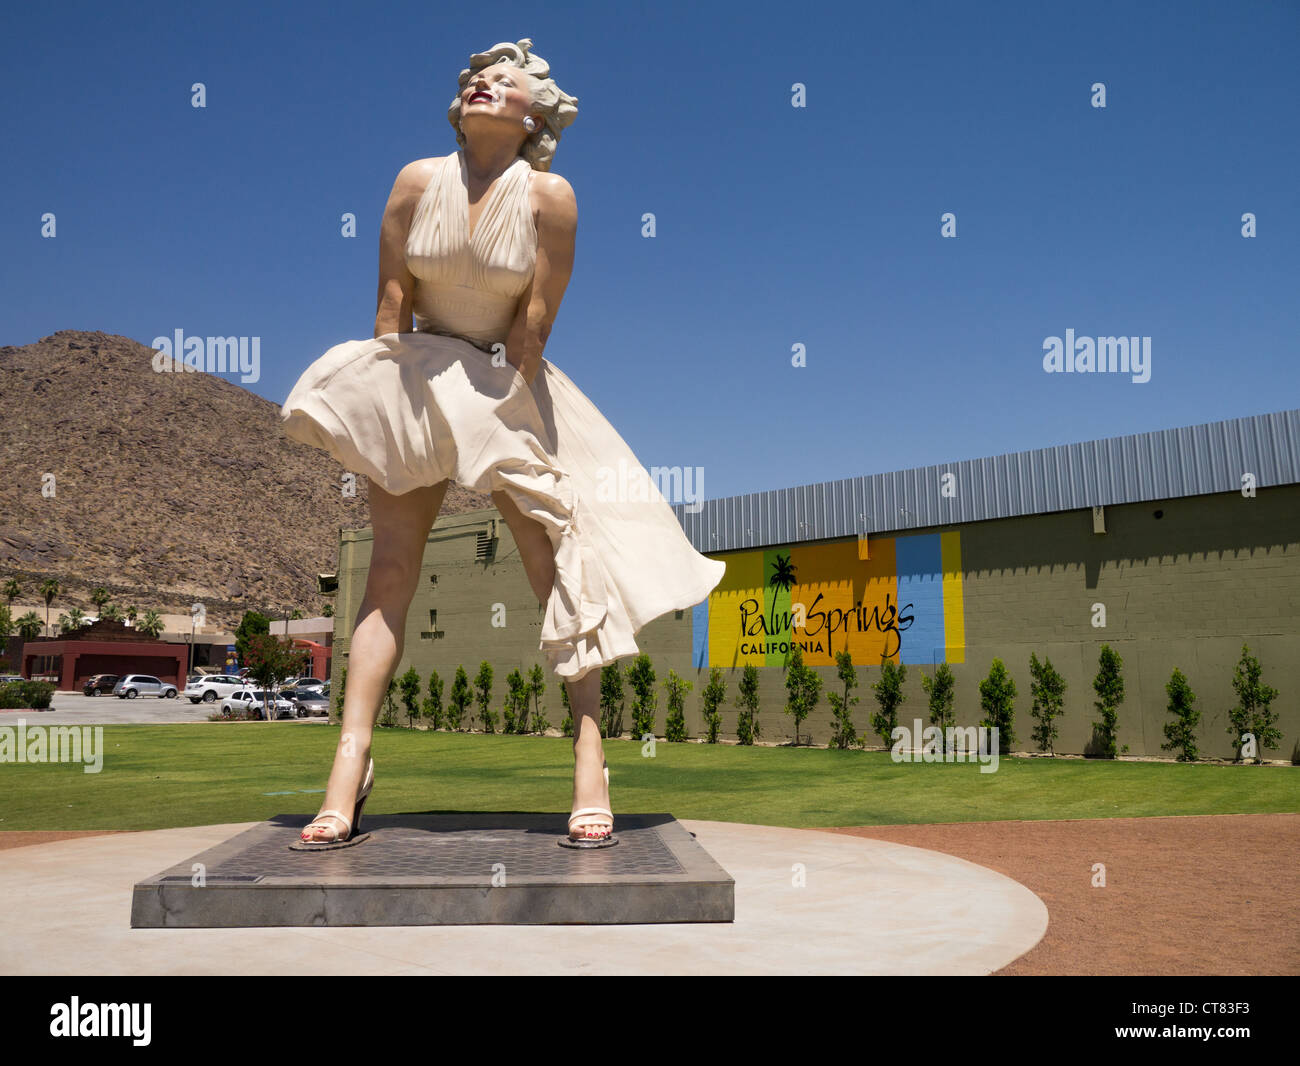 Palm Springs residents sue to remove 25-foot Marilyn Monroe statue